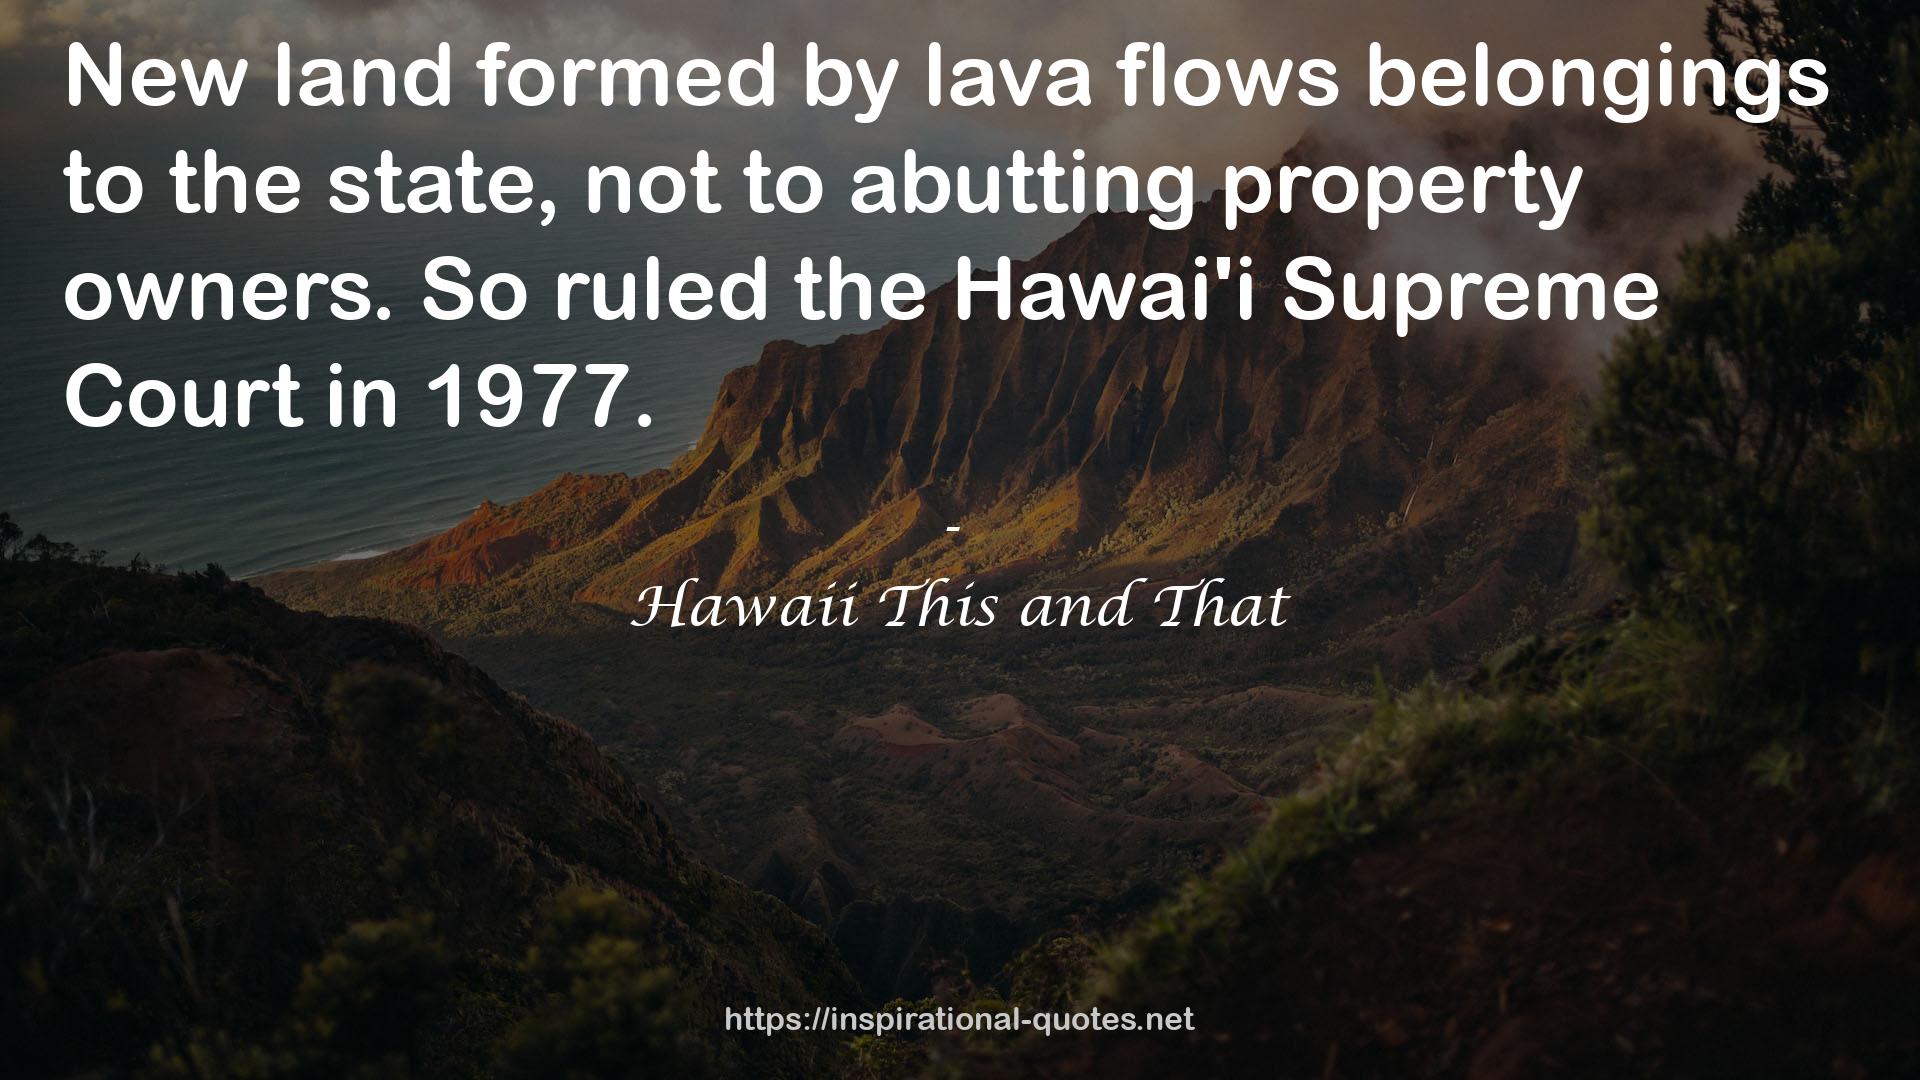 Hawaii This and That QUOTES